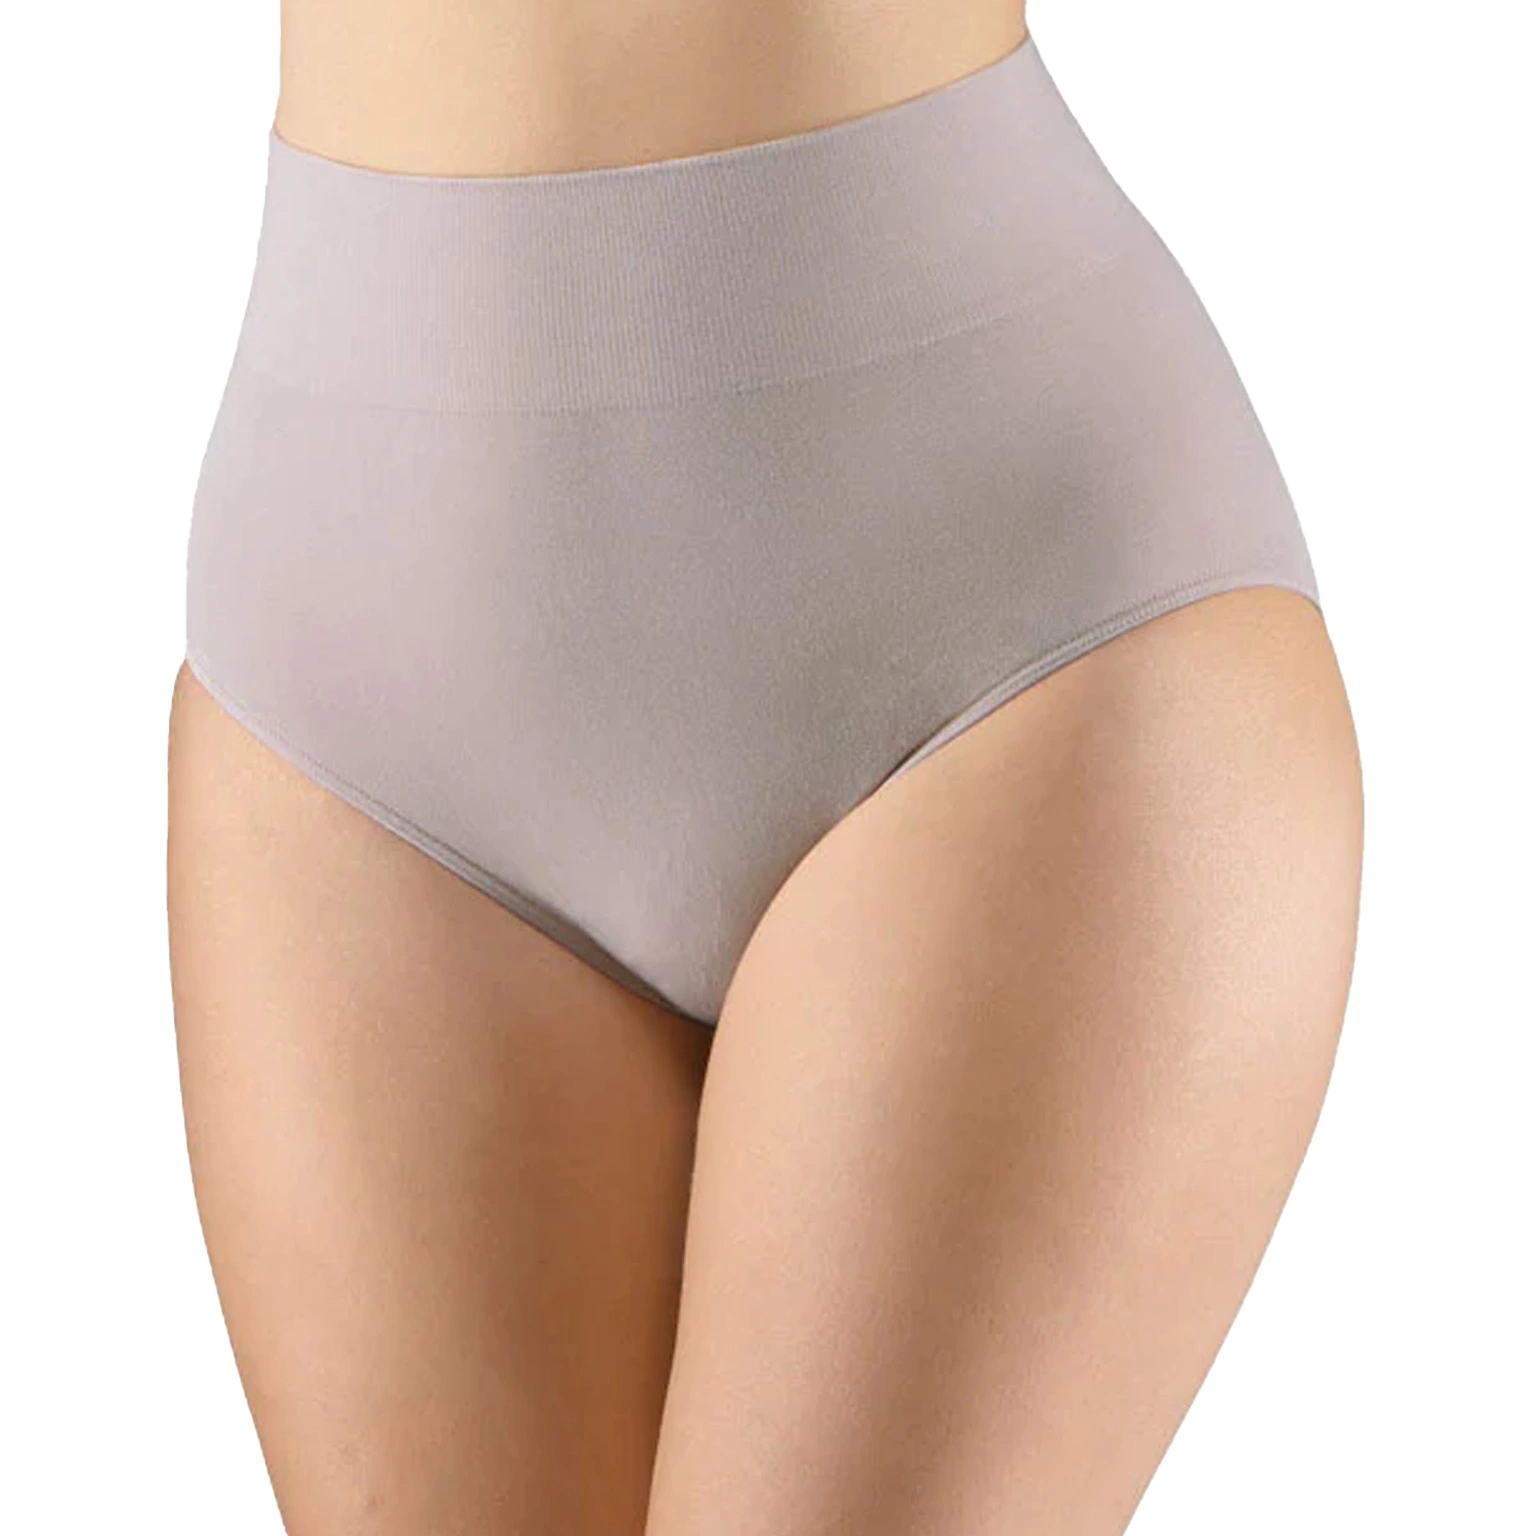 Seamless Underwear Manufacturing with many styles